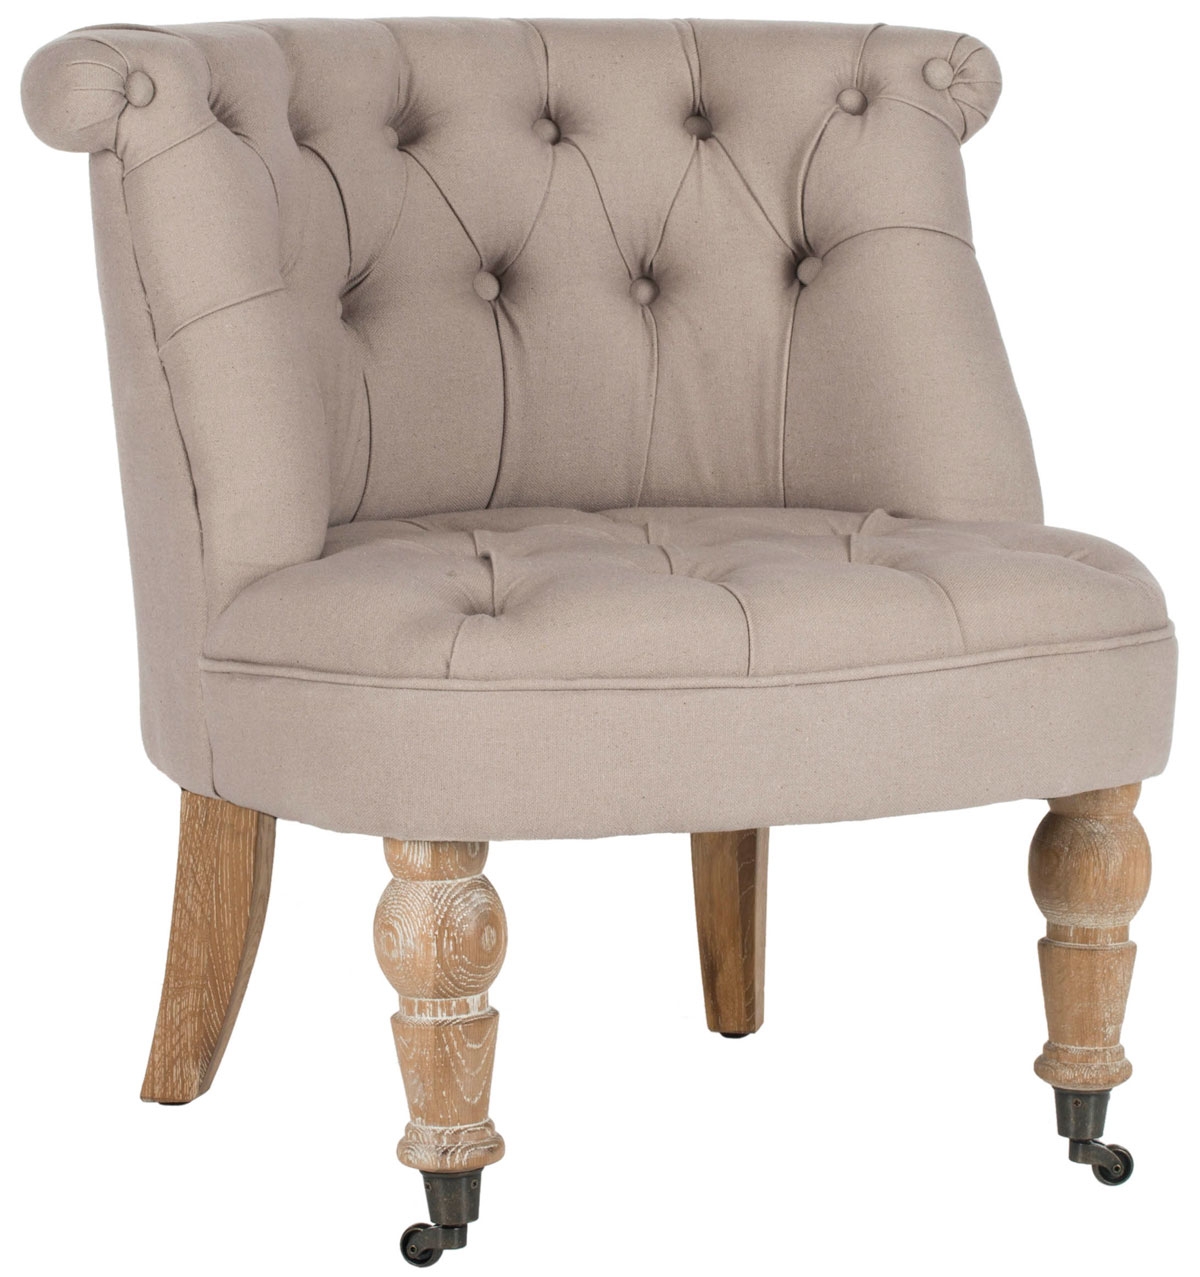 Carlin Tufted Chair - Taupe/White Wash - Arlo Home - Image 2